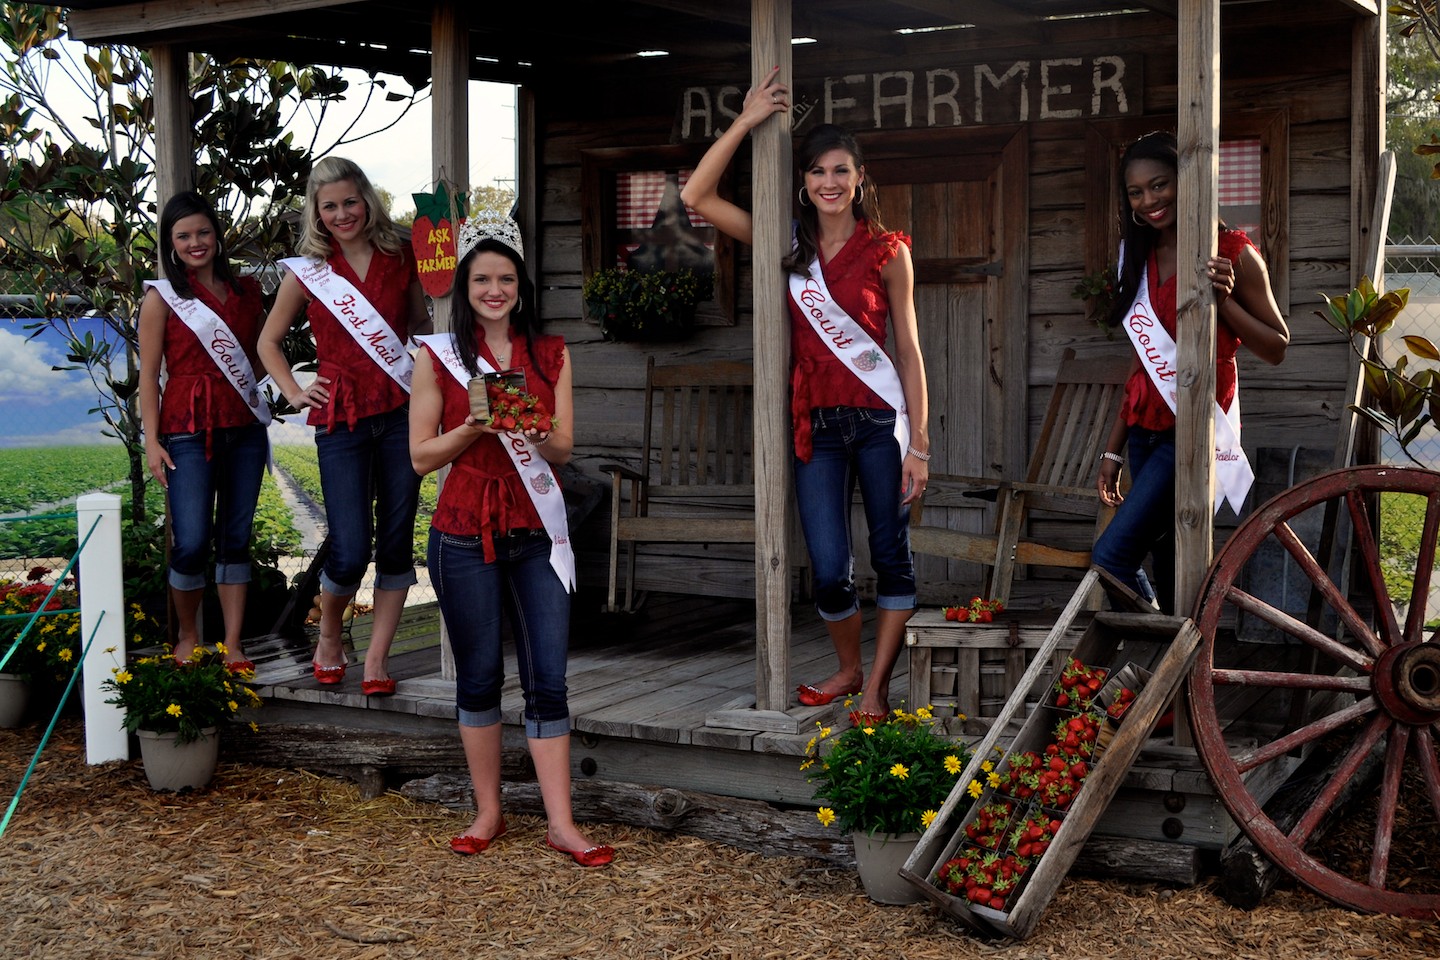 Florida Strawberry Festival Strawberry Queen Victoria Watkins and Court in front of our Ask the Farmer Booth